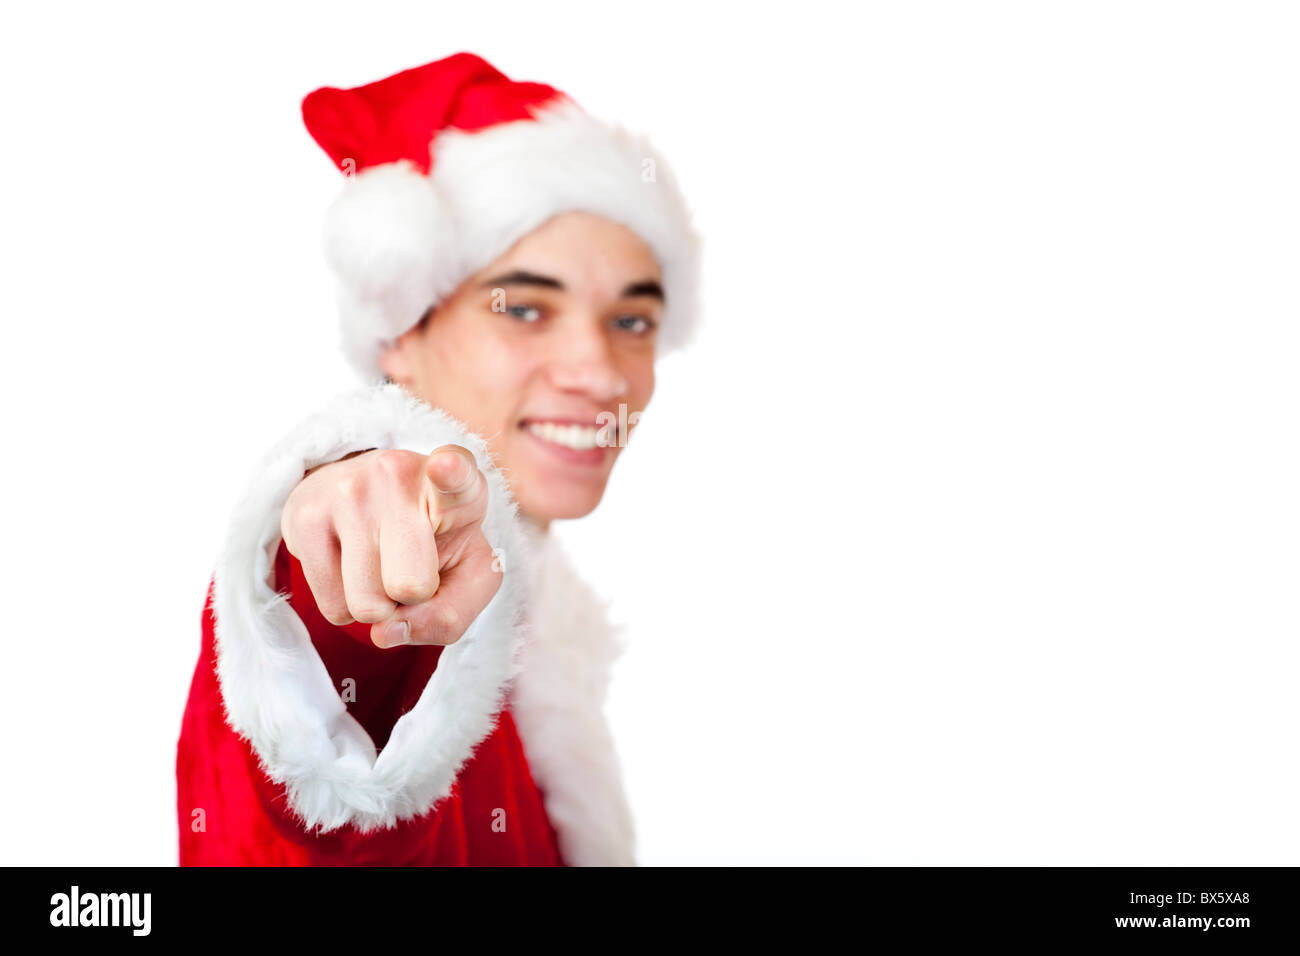 Smiling male Santa Claus teenager pointing at camera. Isolated on white background. Stock Photo